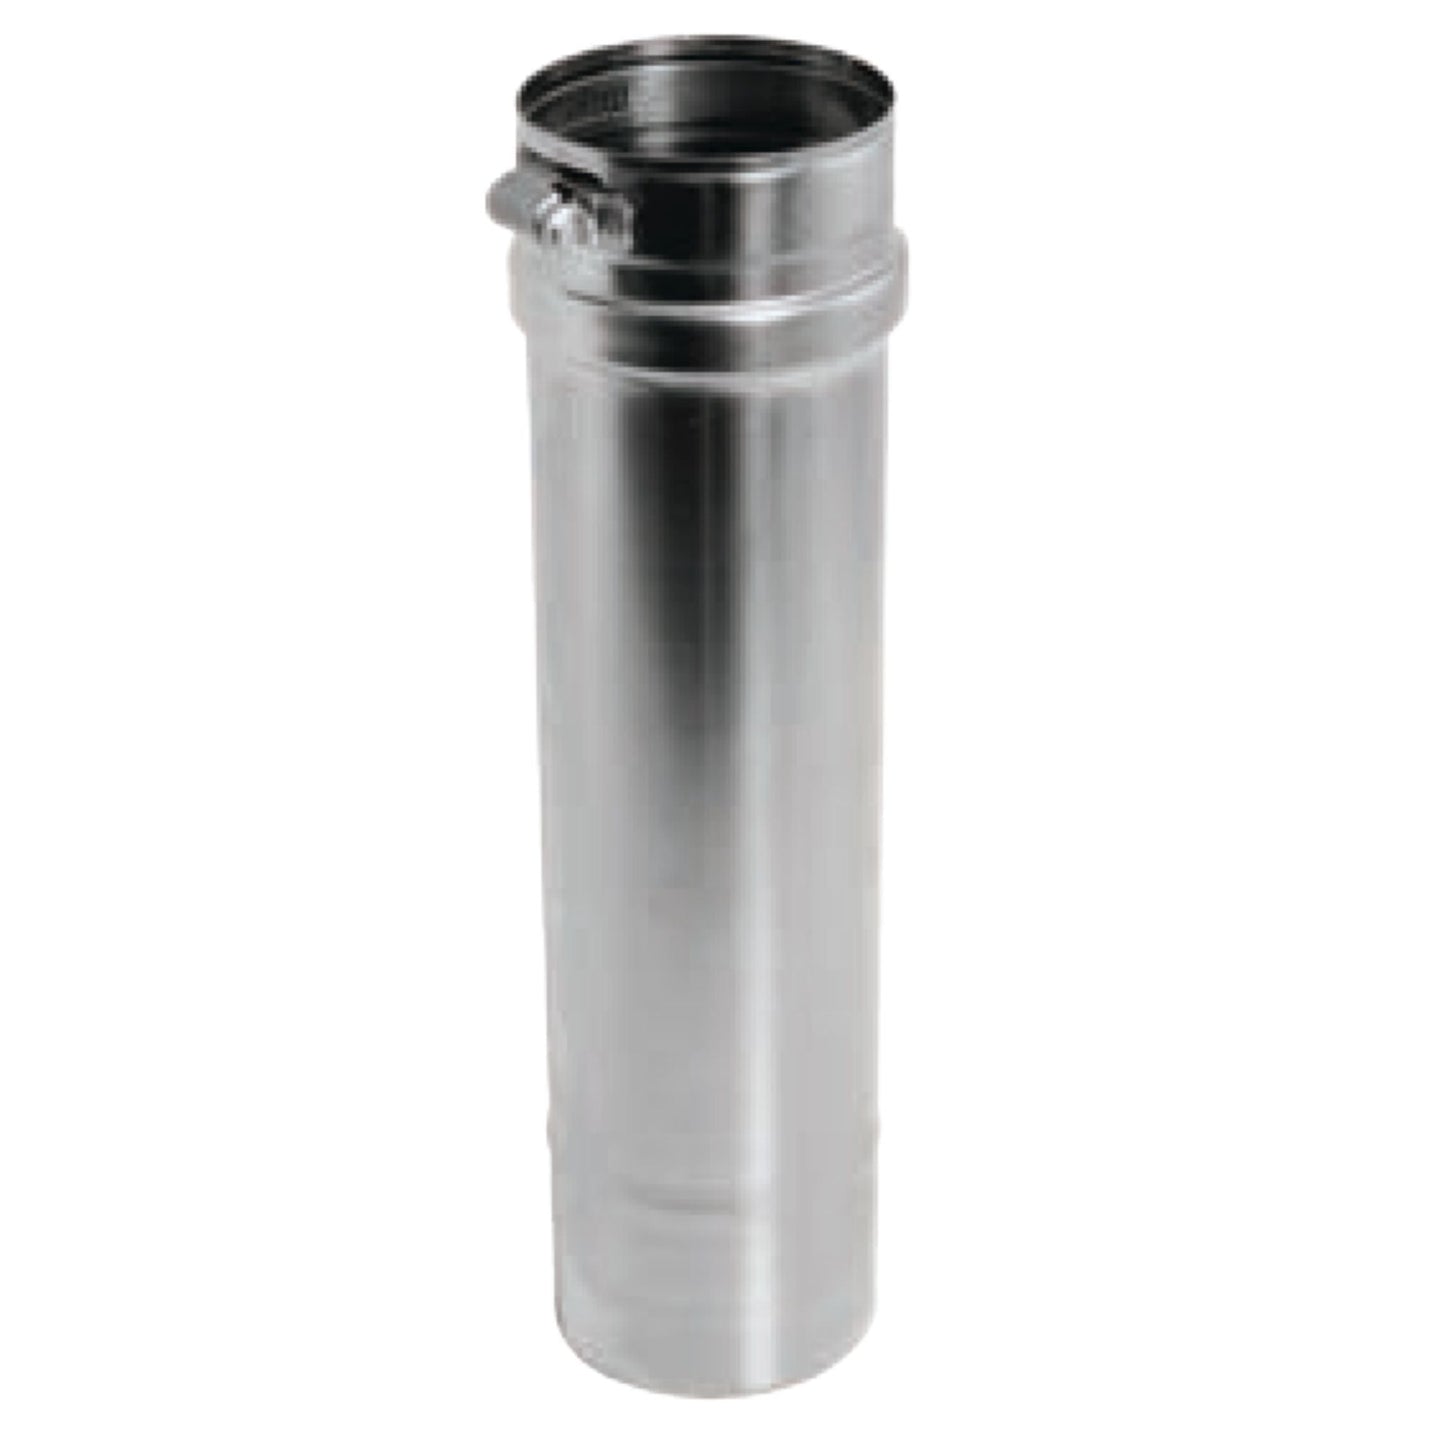 DuraVent FasNSeal 3" x 18" 316L Stainless Steel Vent Length